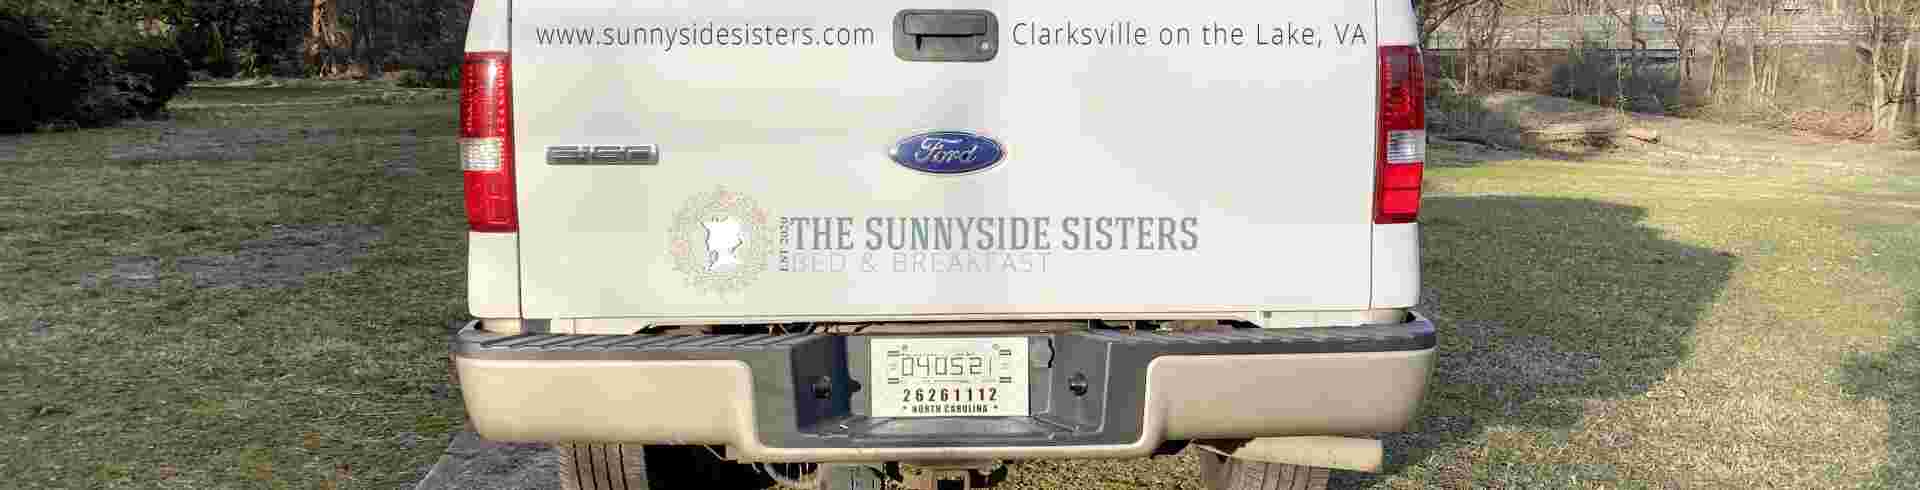 The Sunnyside Sisters Bed and Breakfast / Clarksville VA / Truck F-150 rear with logo